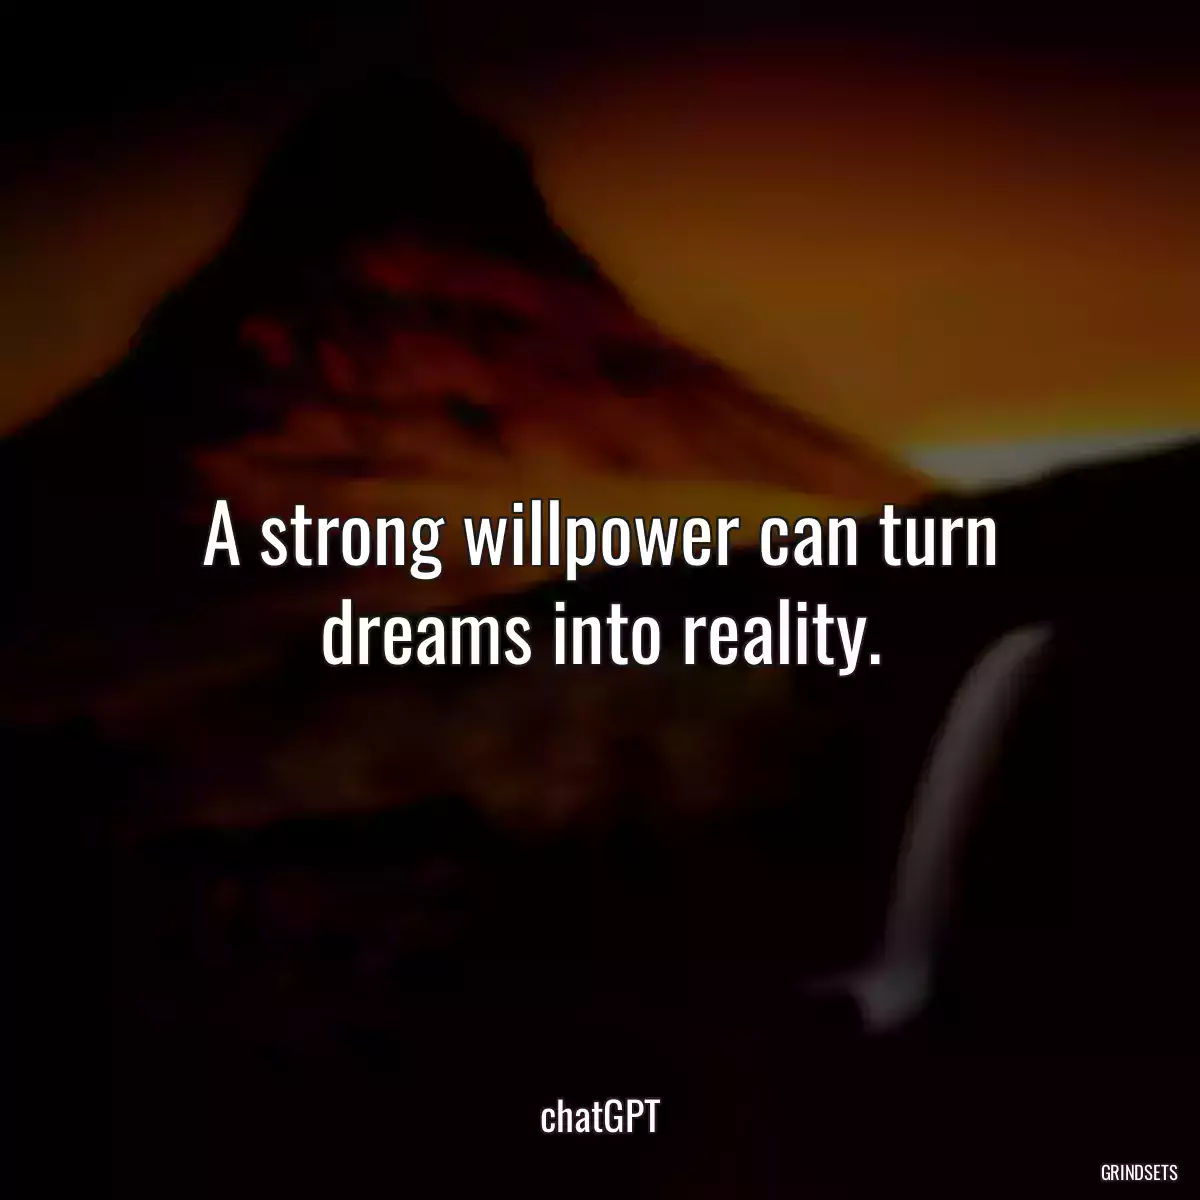 A strong willpower can turn dreams into reality.